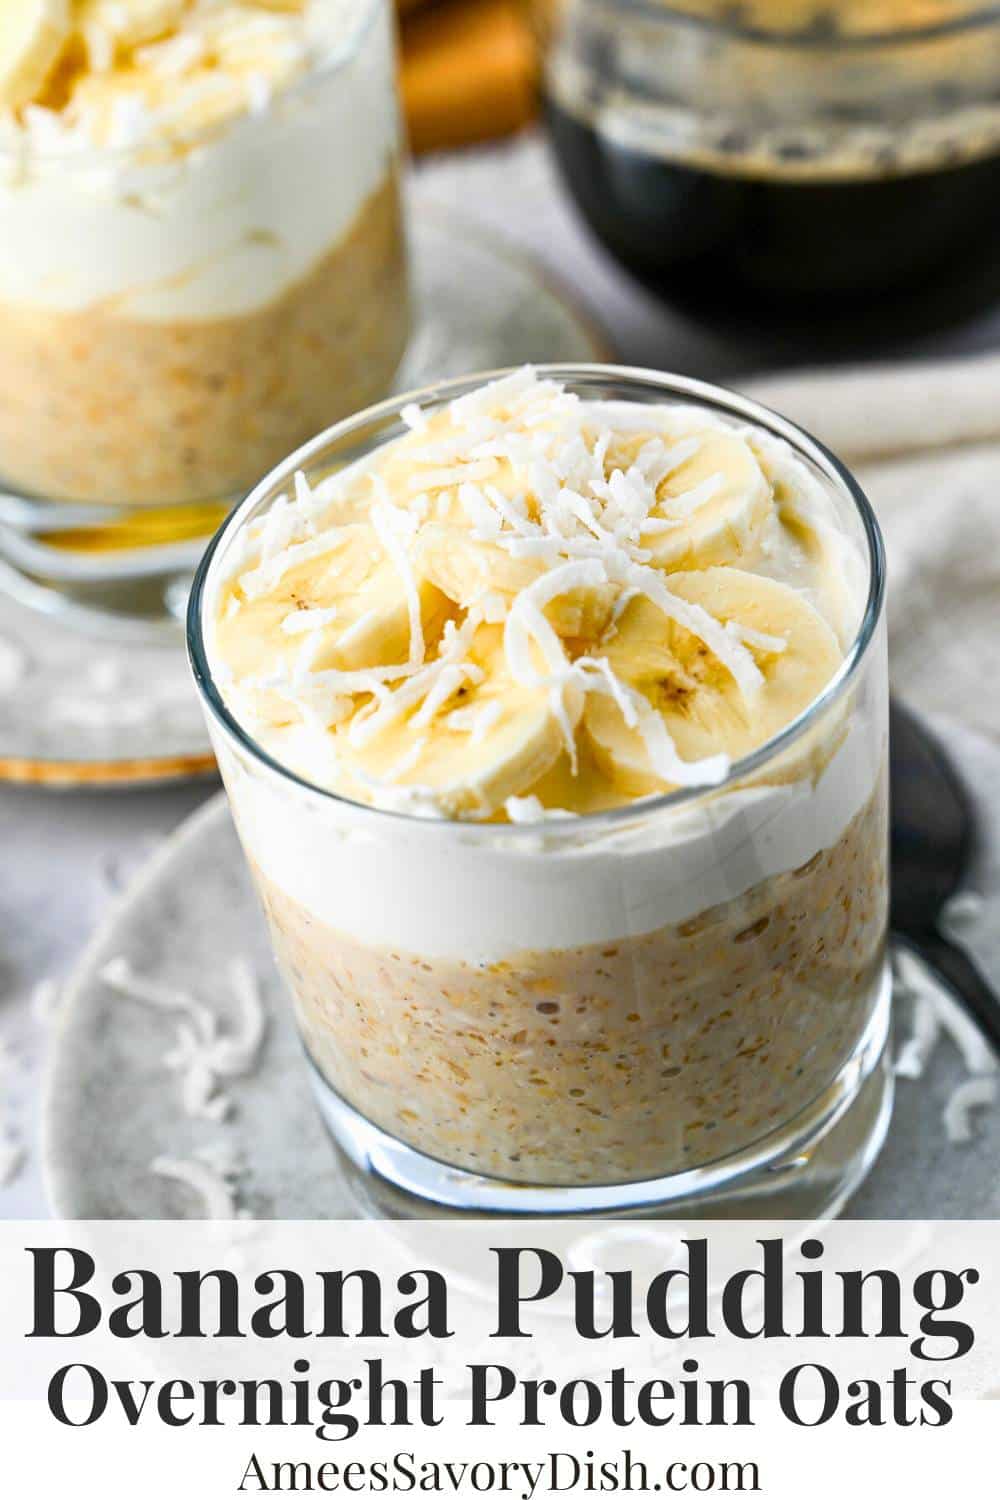 These protein overnight oats capture the flavor of one of my favorite classic Southern desserts with layers of creamy oats, custard-like filling, and sliced bananas. via @Ameessavorydish